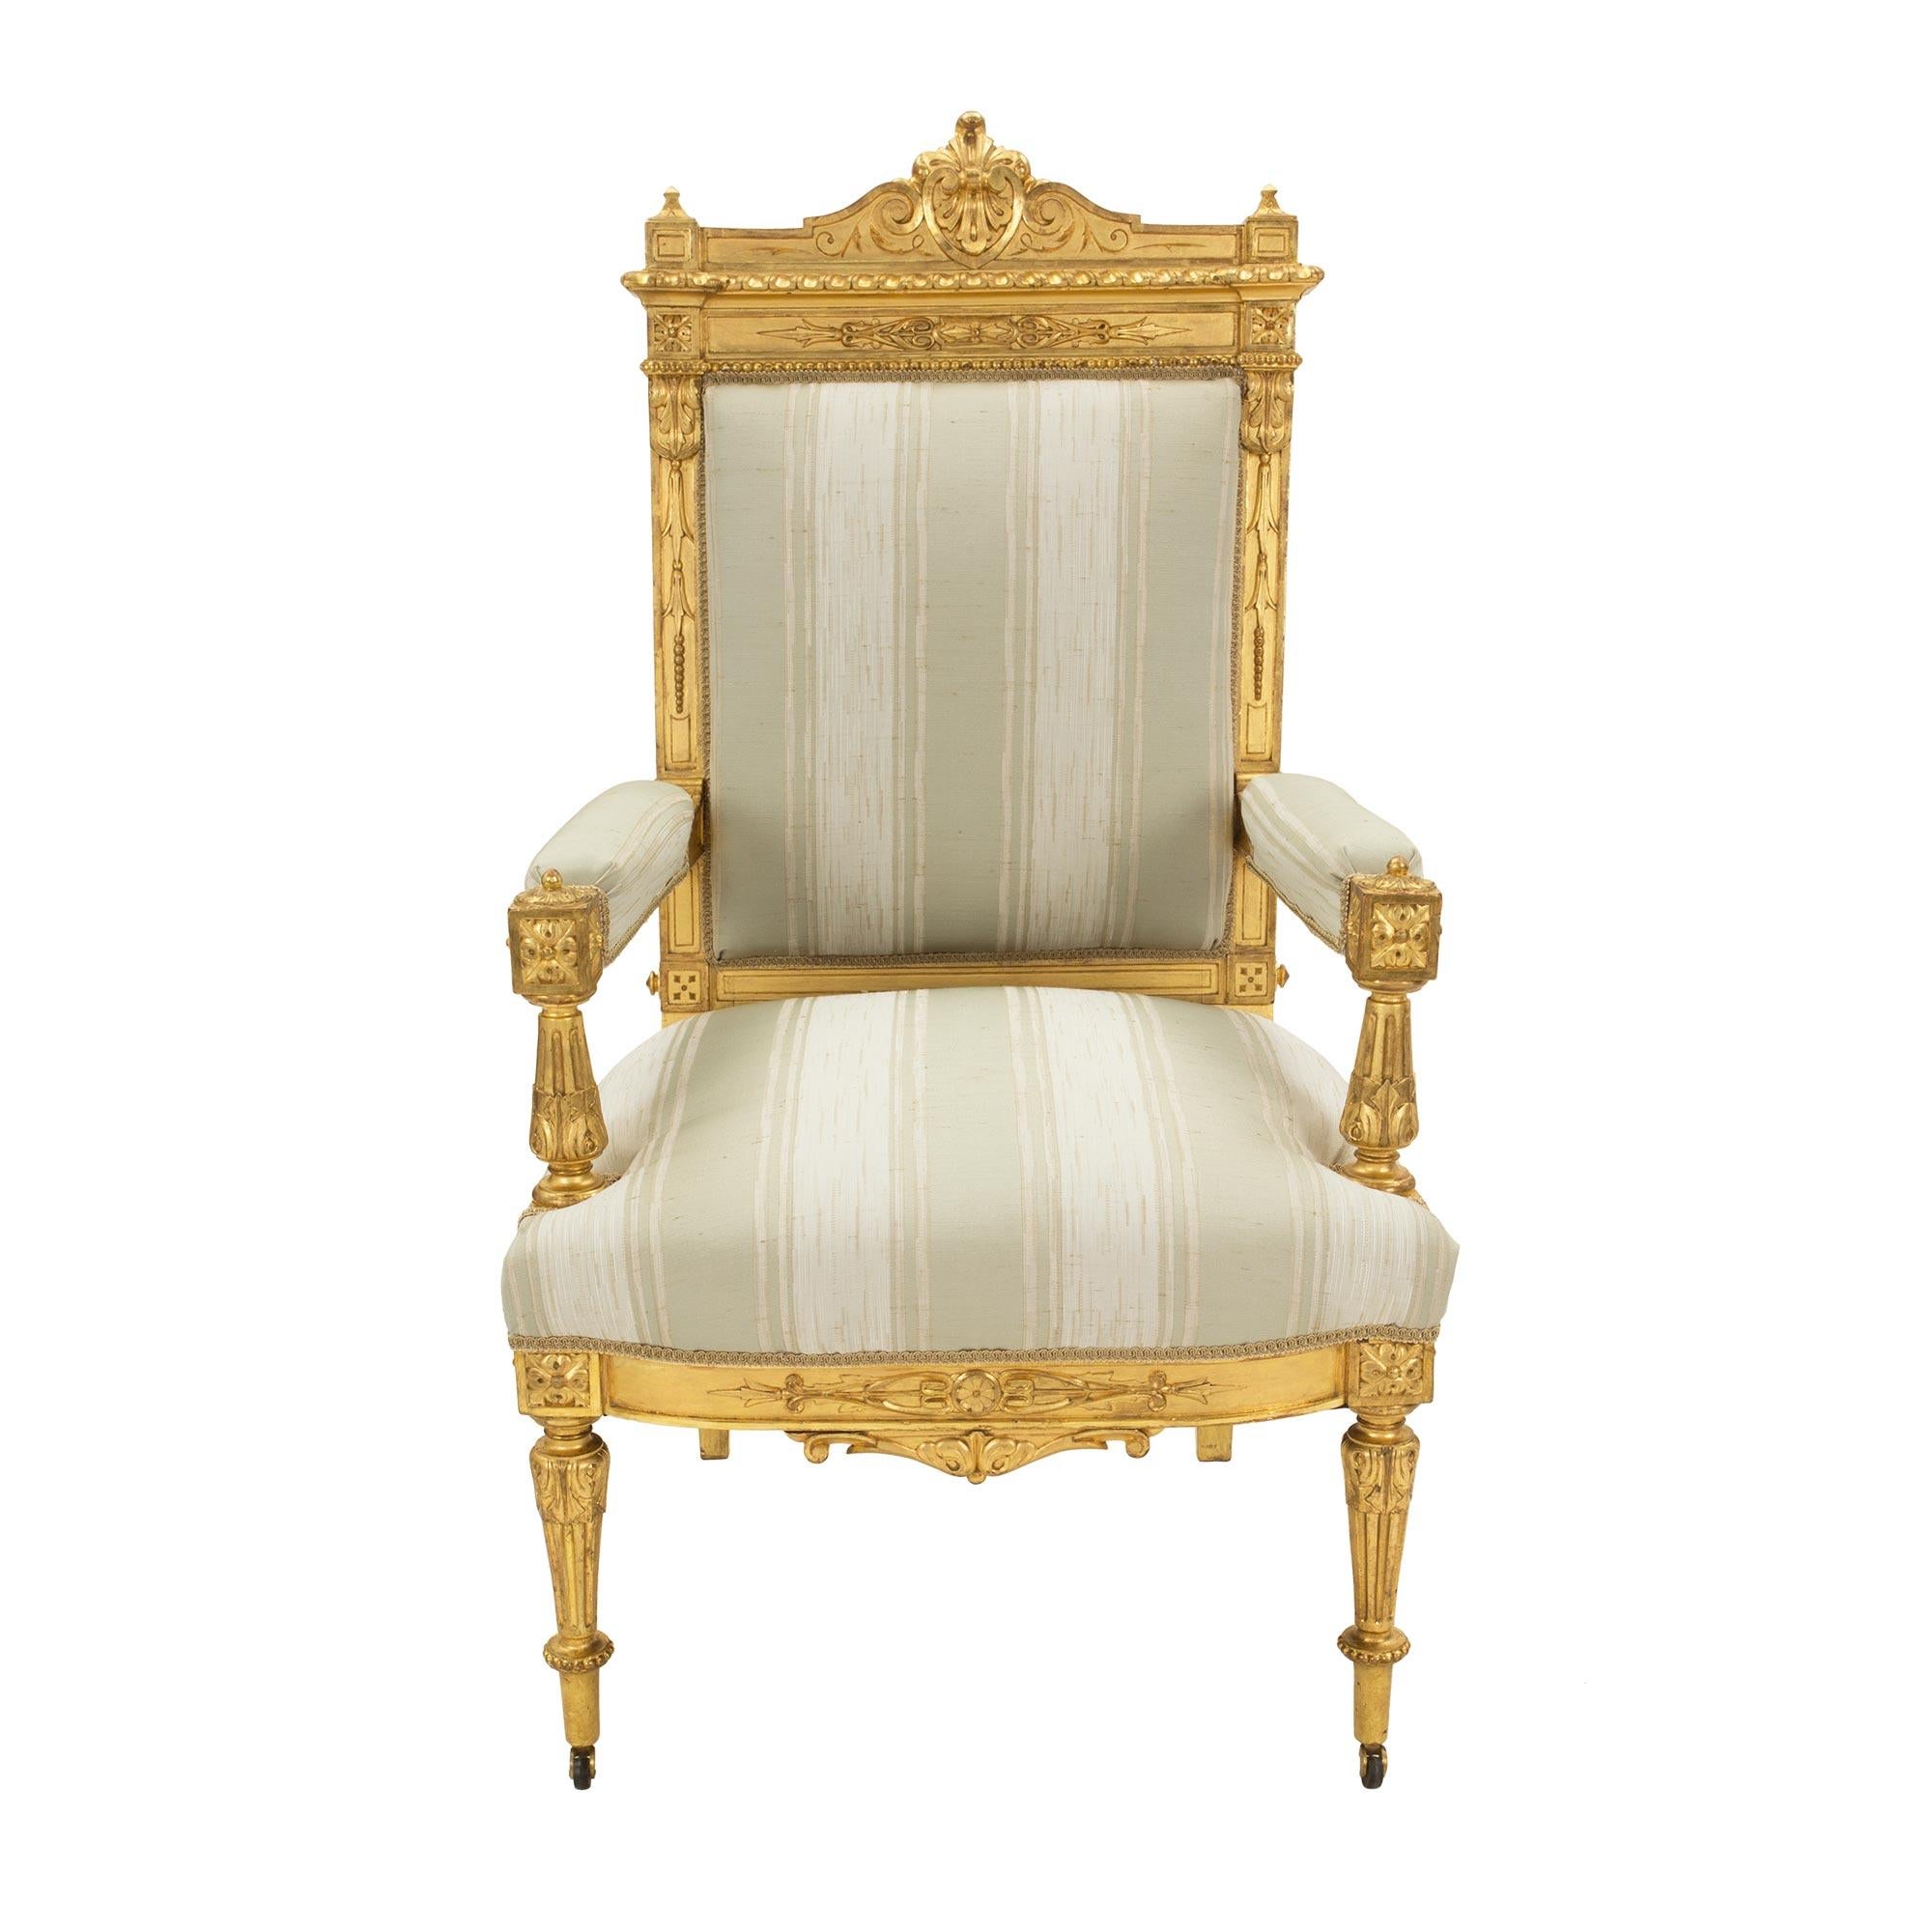 A stunning and complete set of fourteen French 19th century Louis XVI st. giltwood dining chairs. This large set comprises of two armchairs and twelve side chairs. Each chair is raised by their original casters below finely carved circular tapered